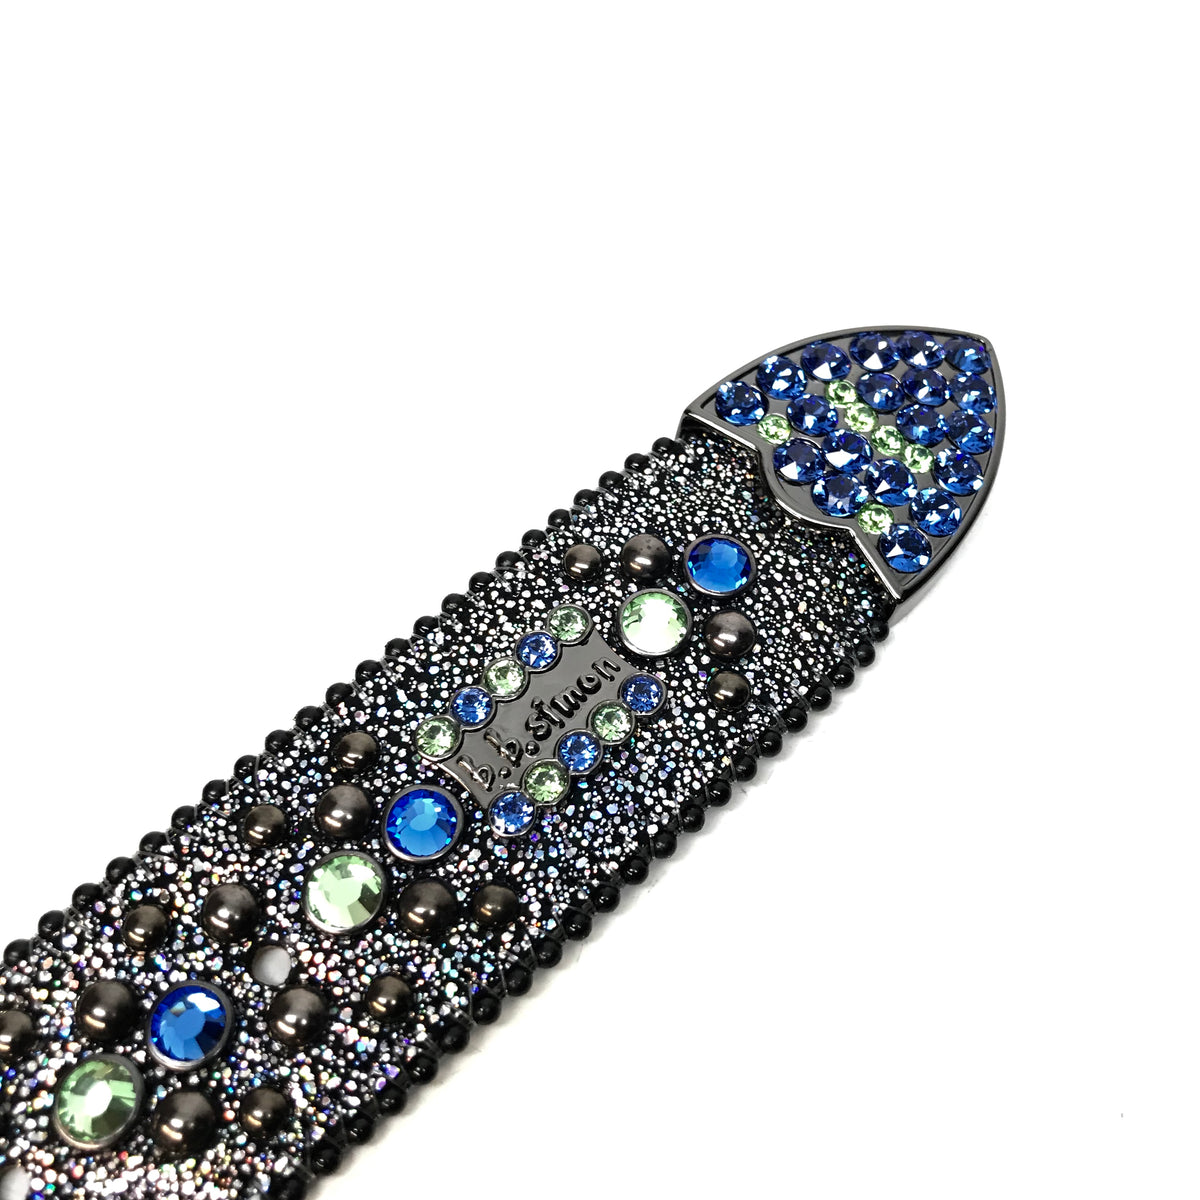 b.b. Simon 'Lime Galaxy' Fully Loaded Crystal Belt - Dudes Boutique